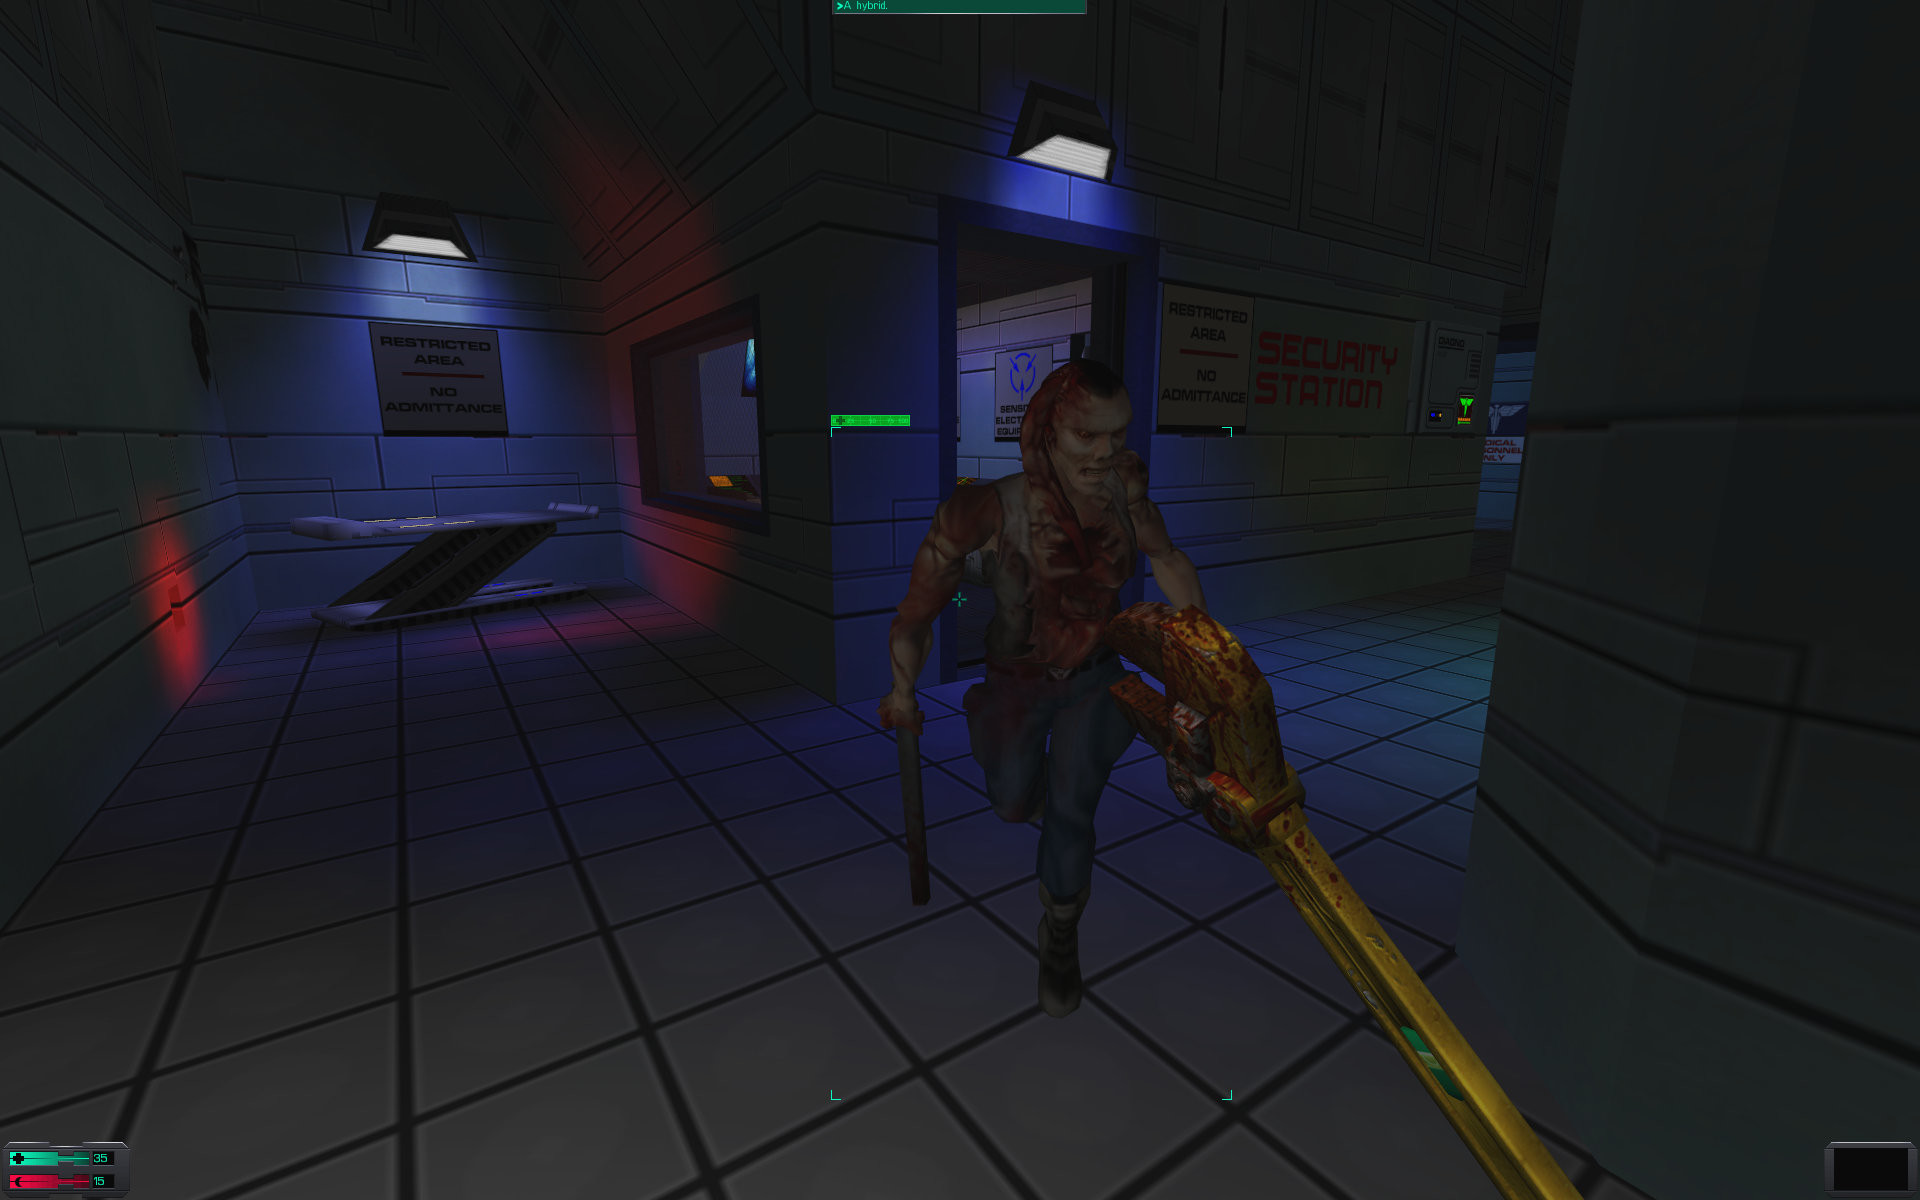 1920x1200 [TTLG] System shock 2 / Thief 2 patched to use high res/multiple screens.